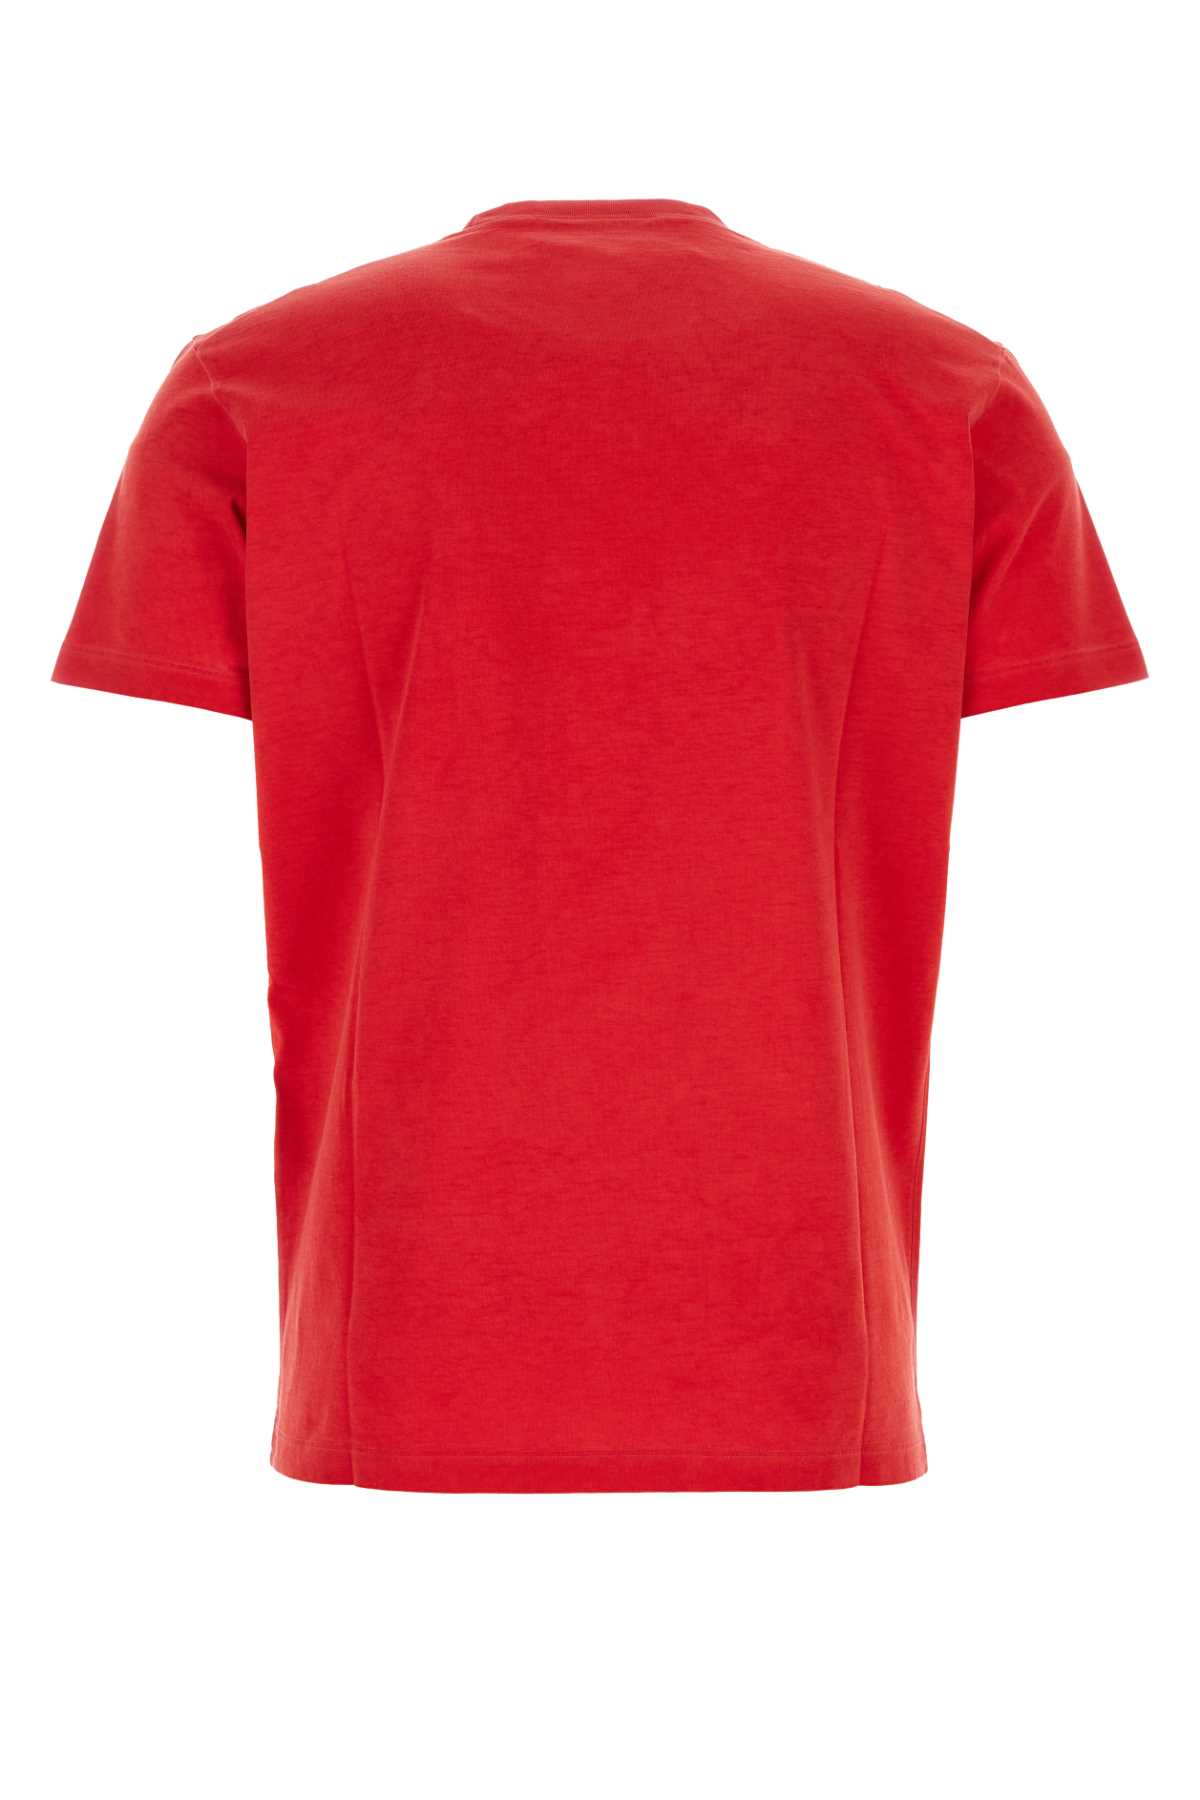 Dsquared2 Red Cotton D2 X Rocco T-shirt